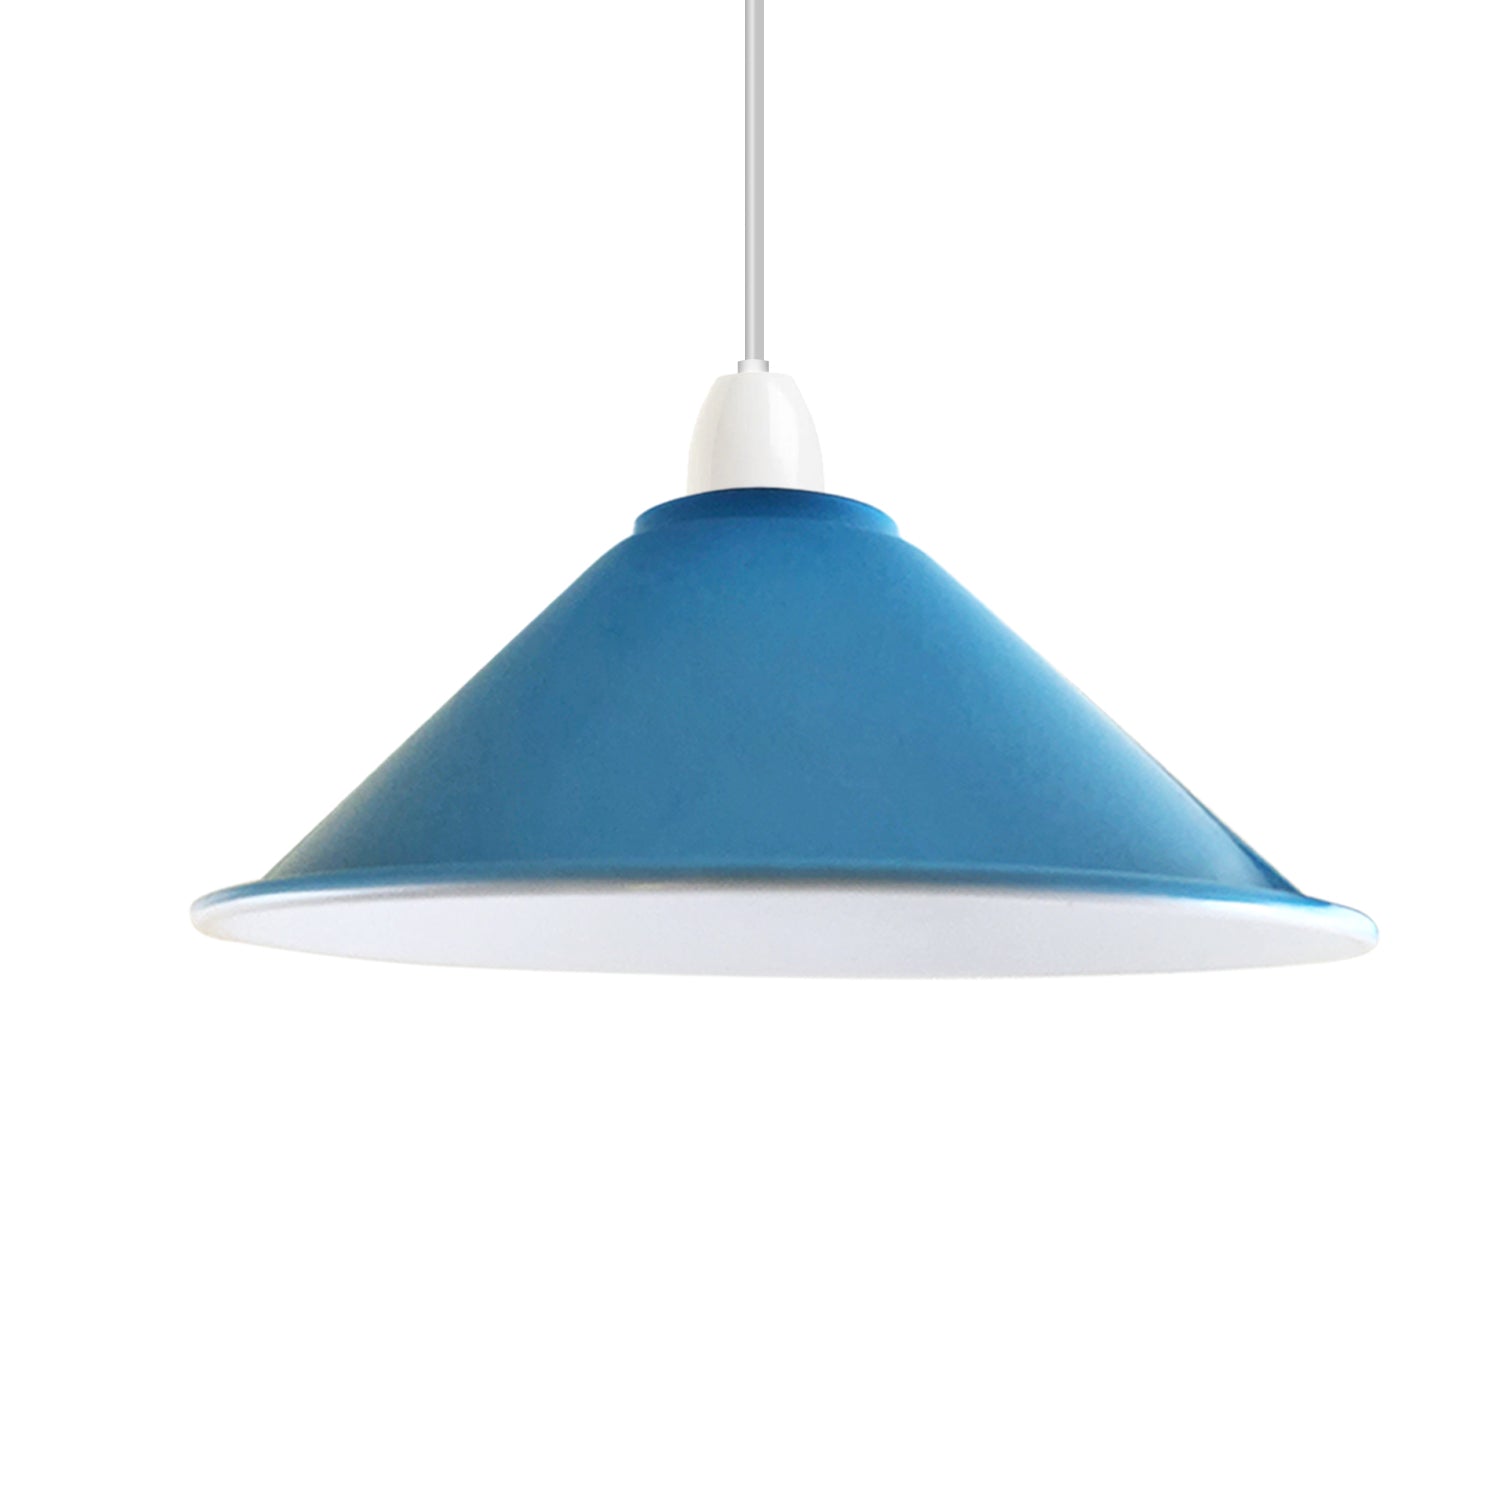 blue easy fit lamp shade- sky blue-easy to install